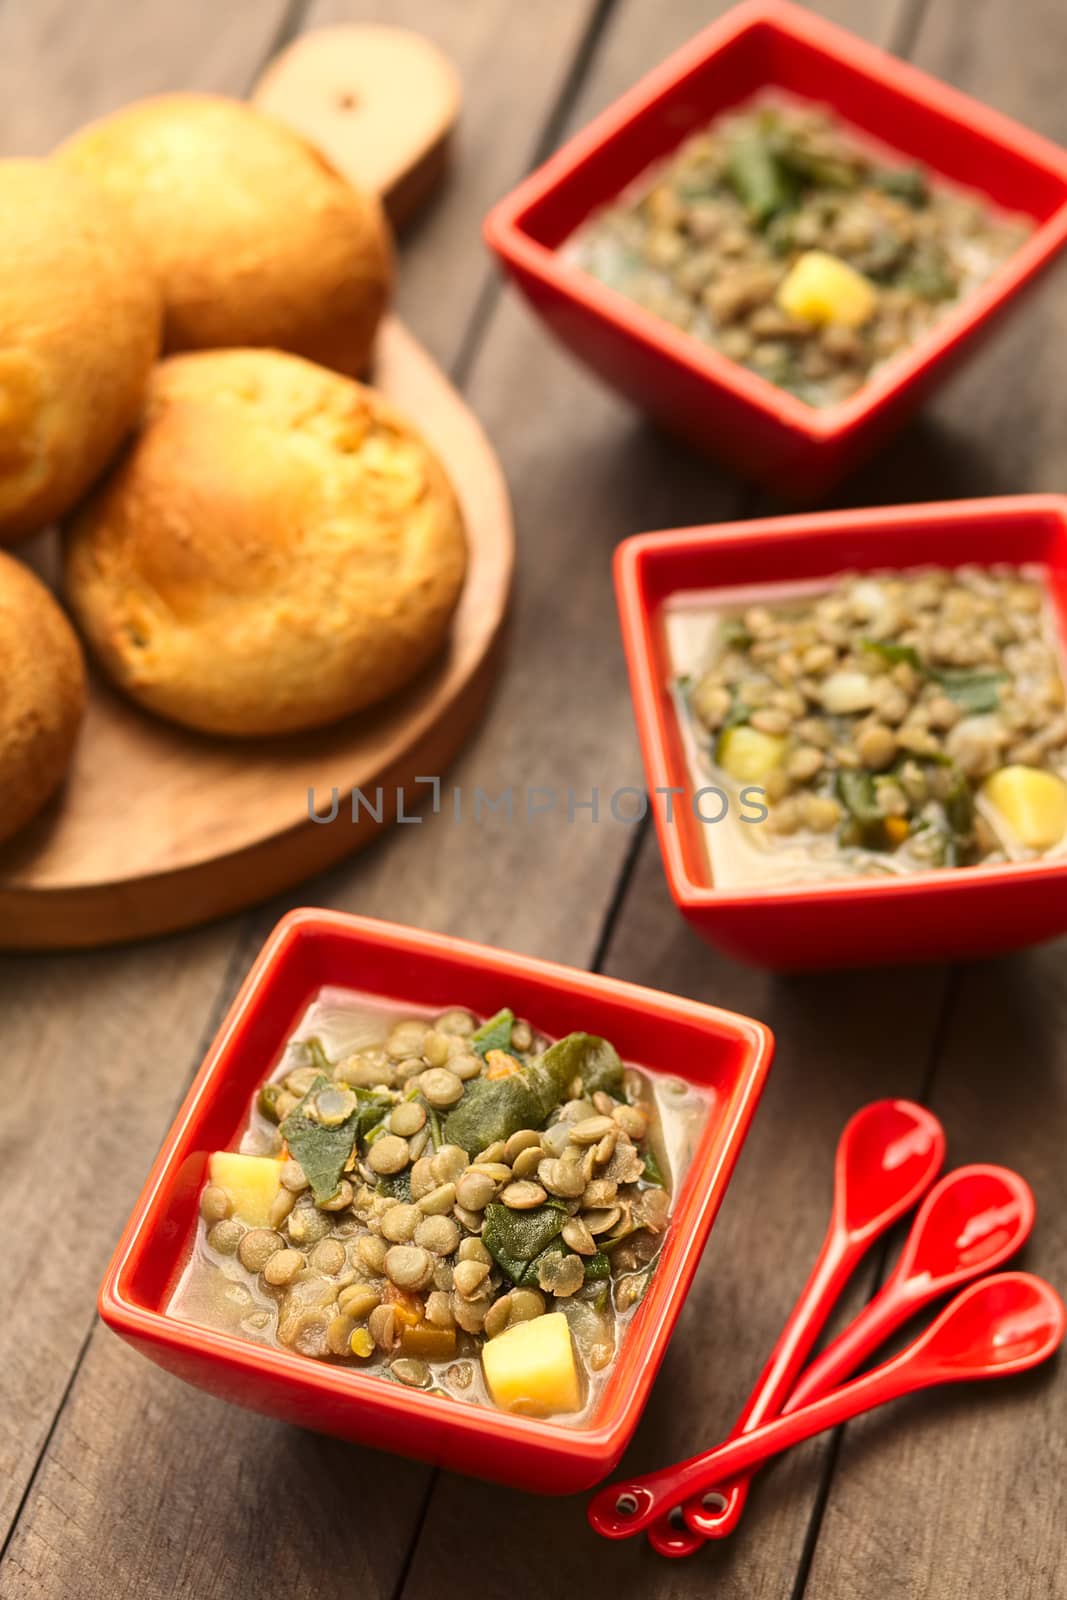 Lentil and Spinach Soup by ildi